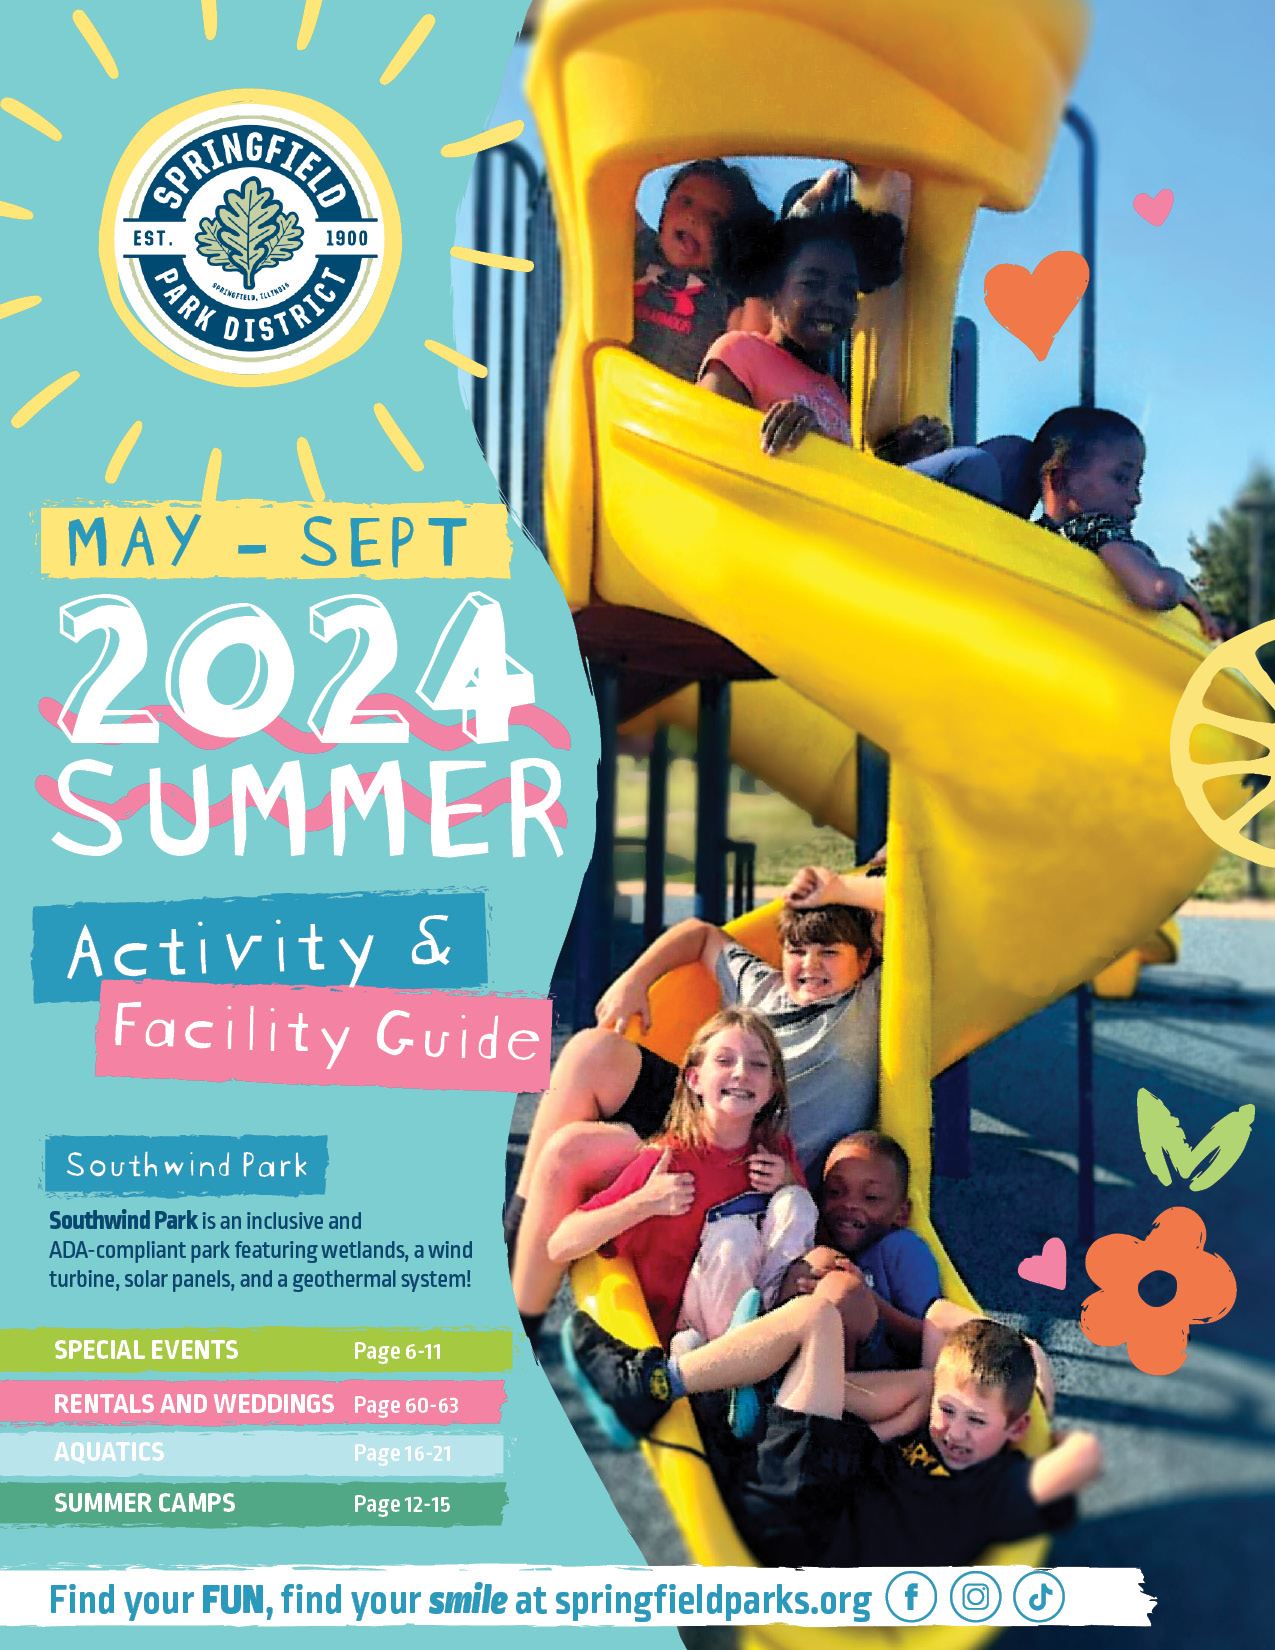 Cover Image for the Park District 2024 Summer Activity Guide